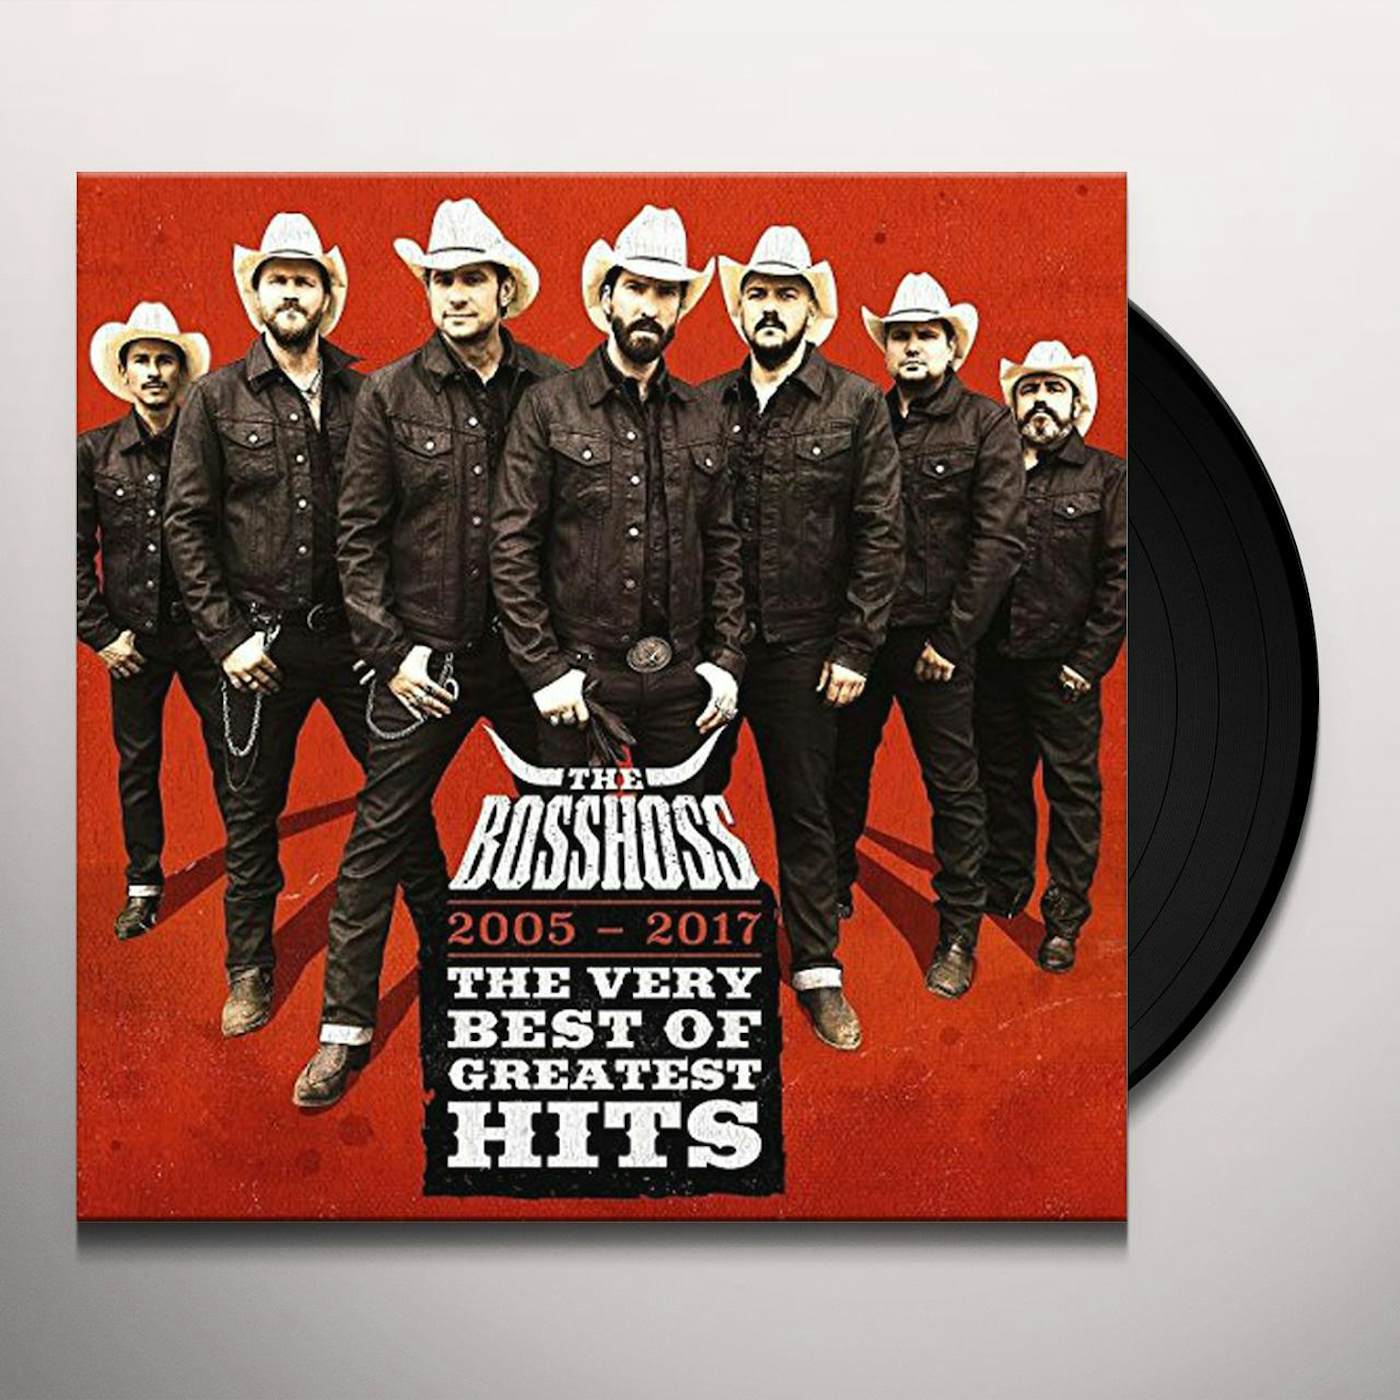 The BossHoss VERY BEST OF GREATEST HITS 2005-2017 Vinyl Record